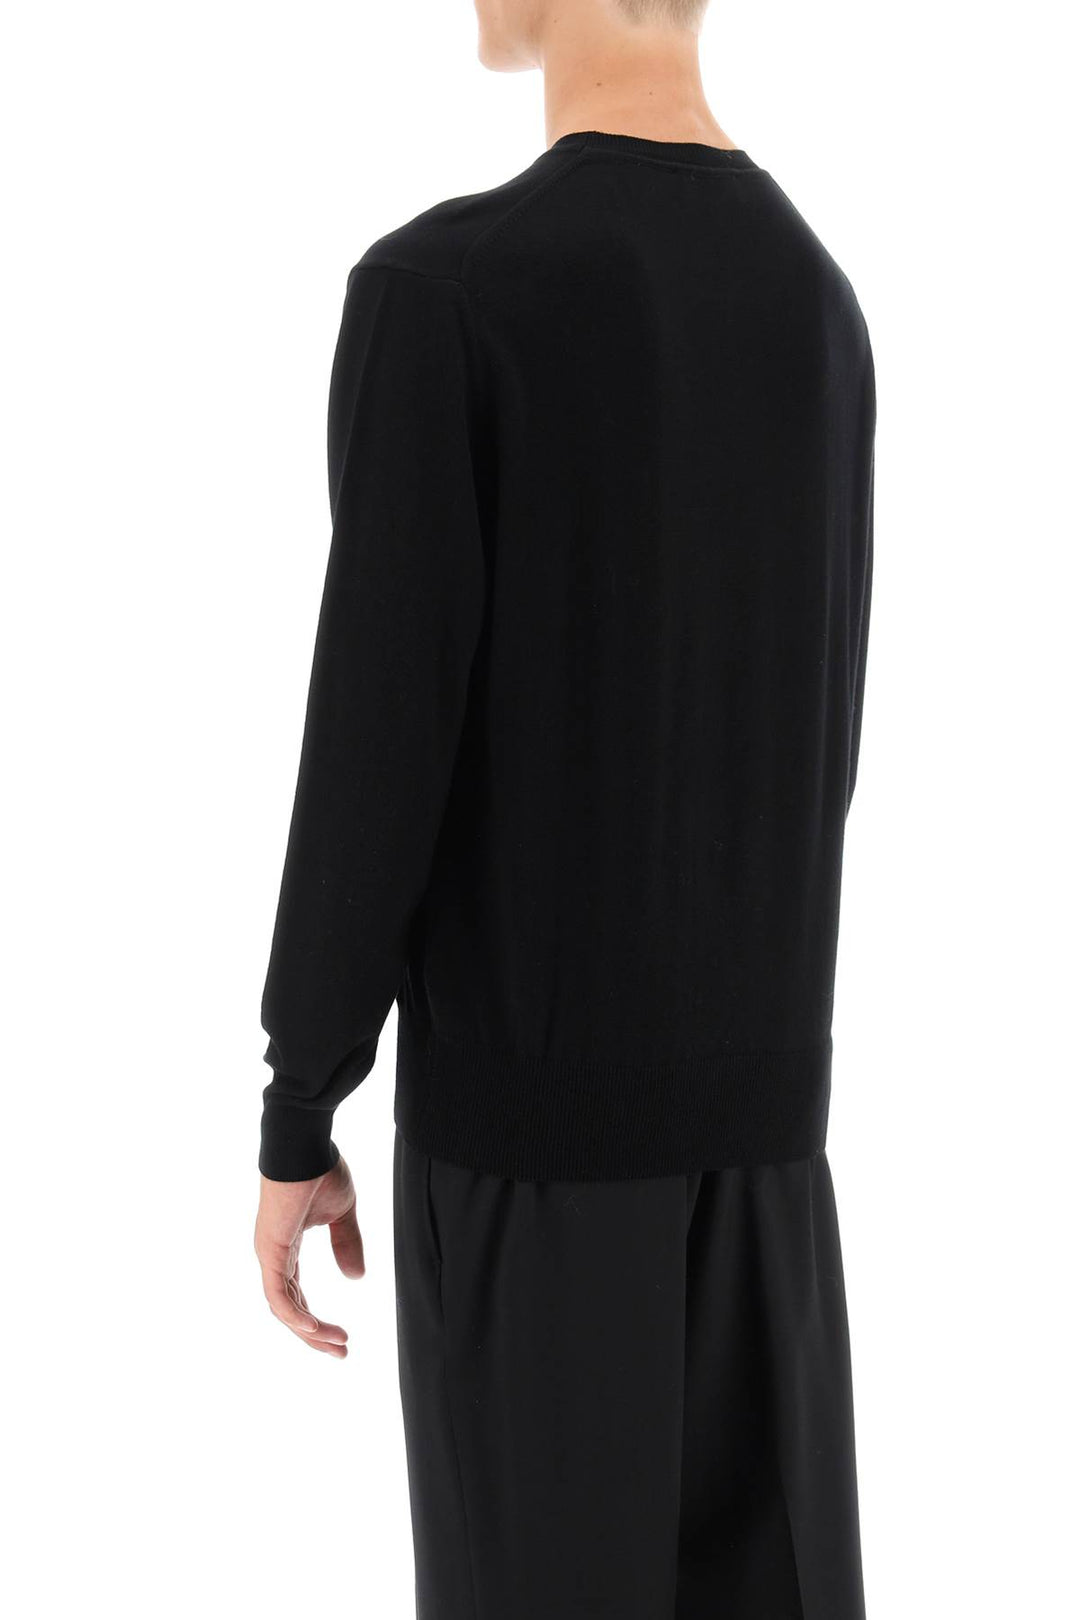 Vivienne Westwood Organic Cotton And Cashmere Sweater   Nero